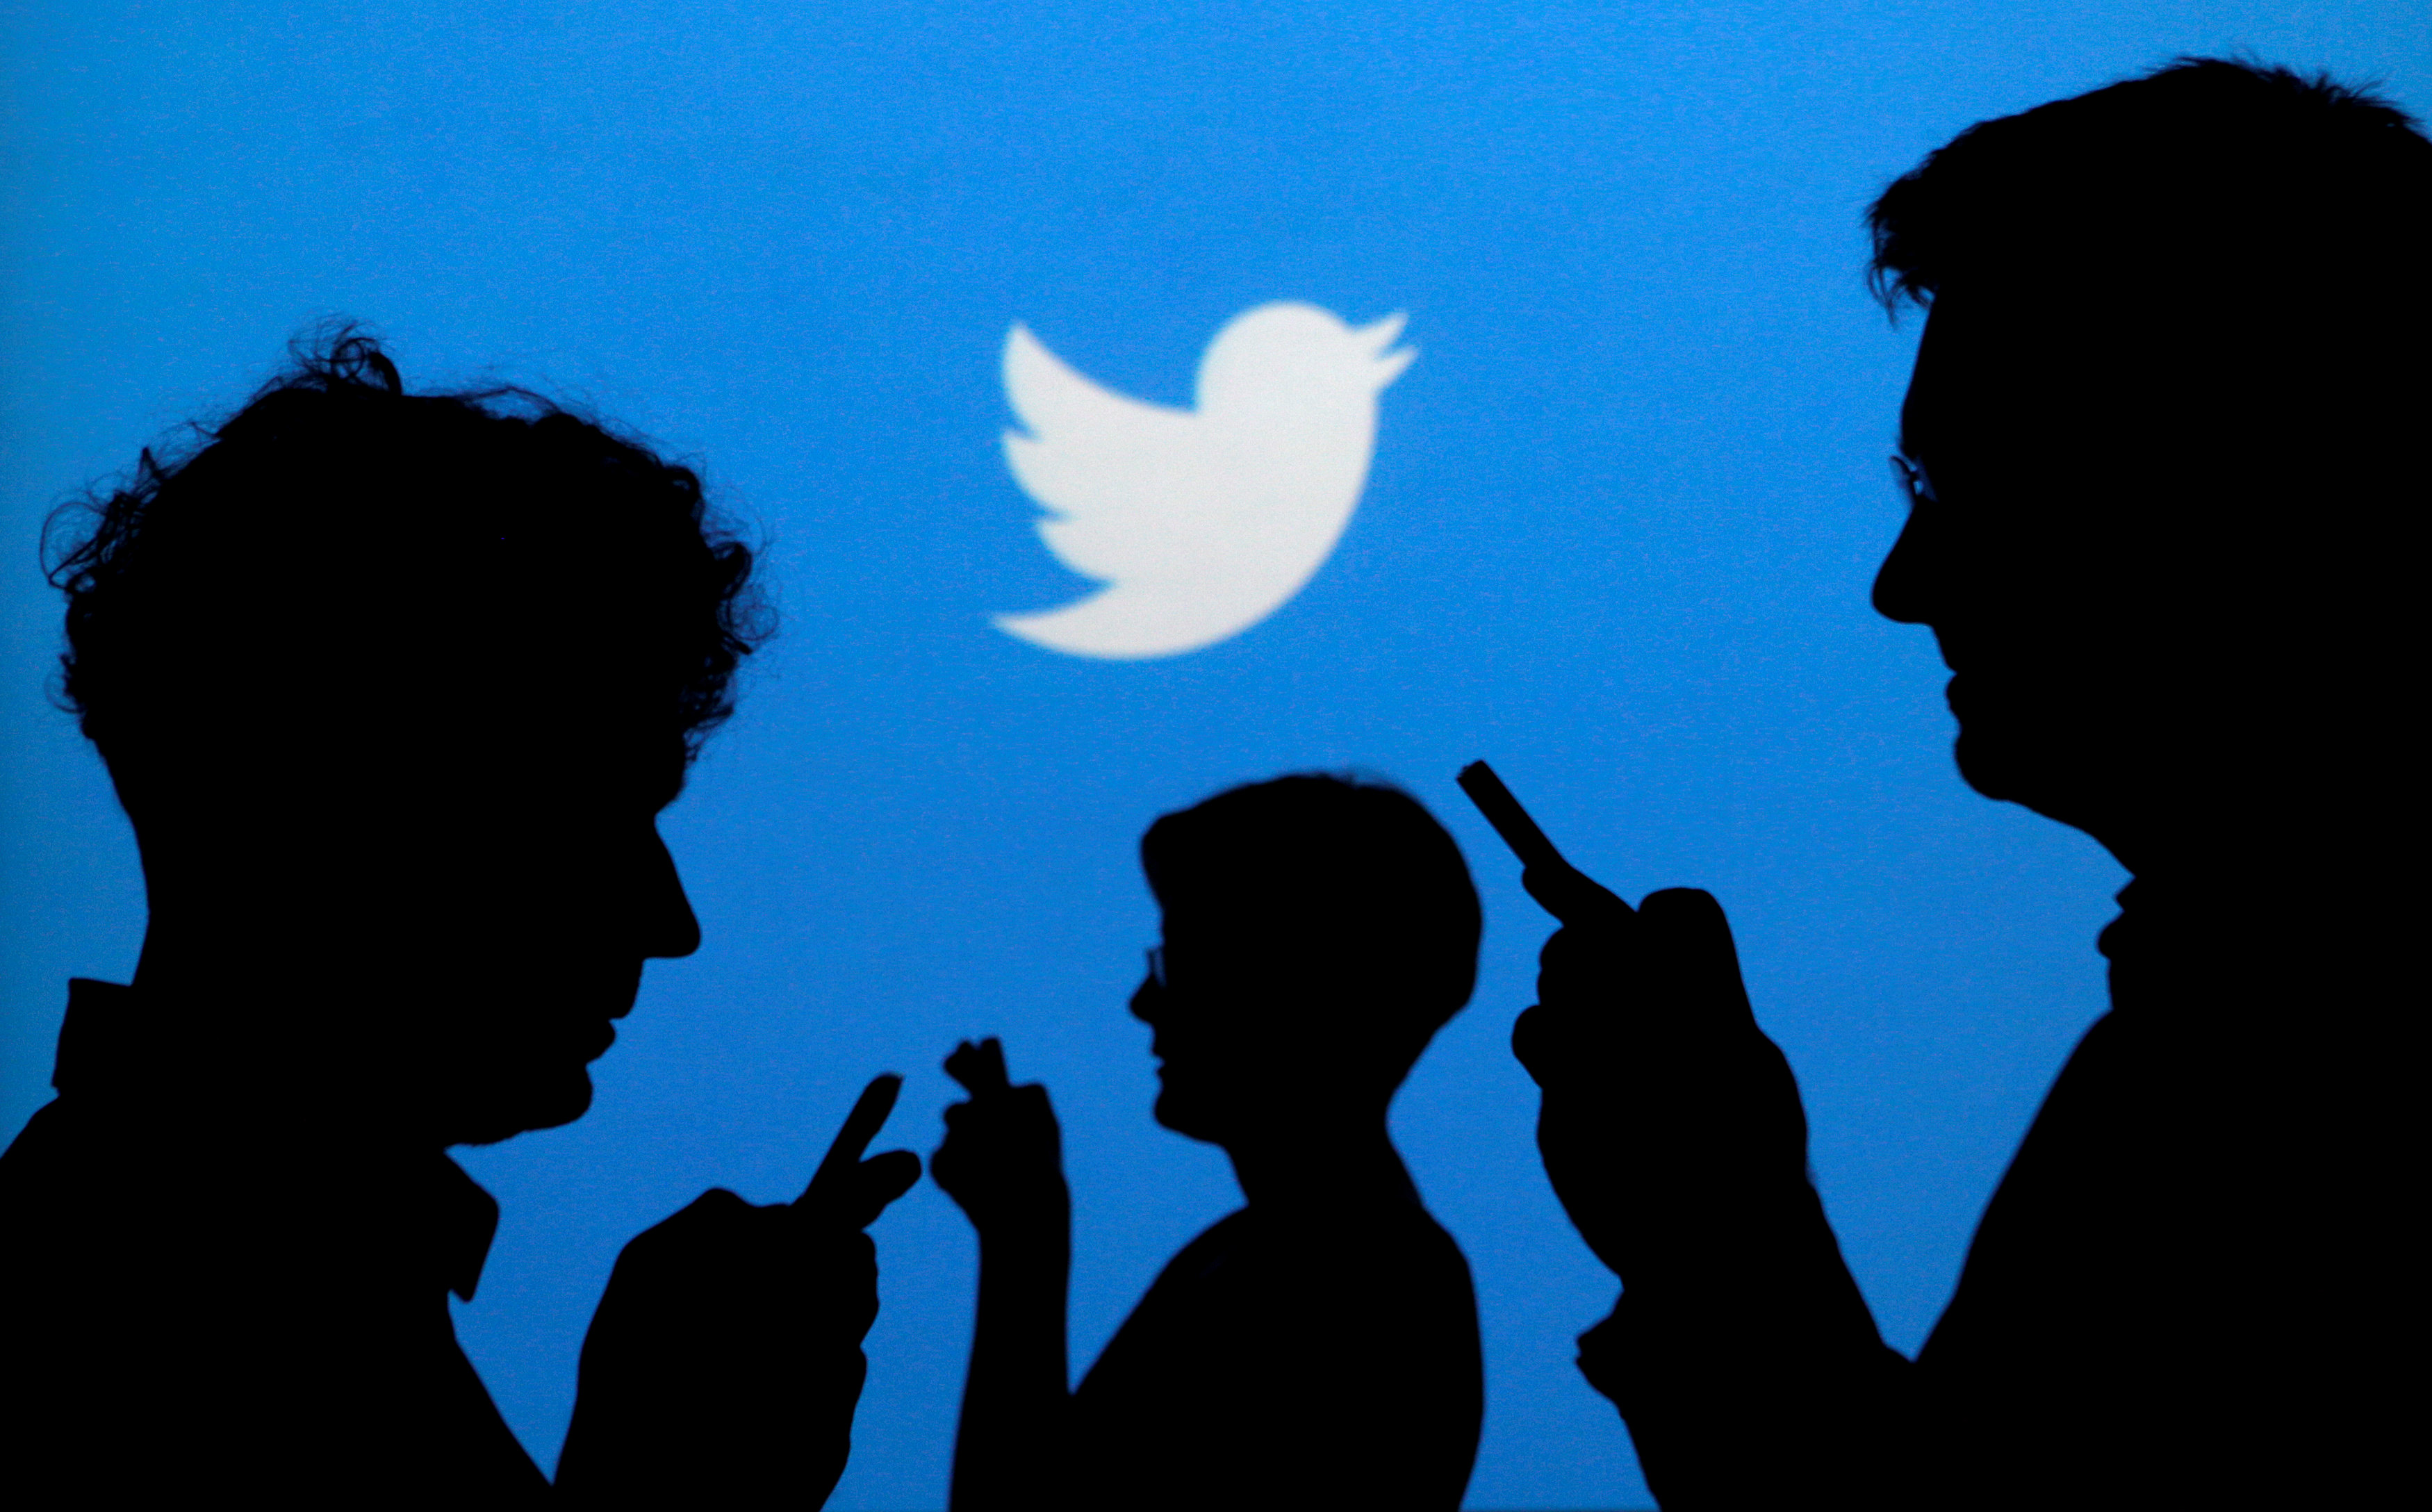 In Japan, Twitter sees a surge of users and revenue